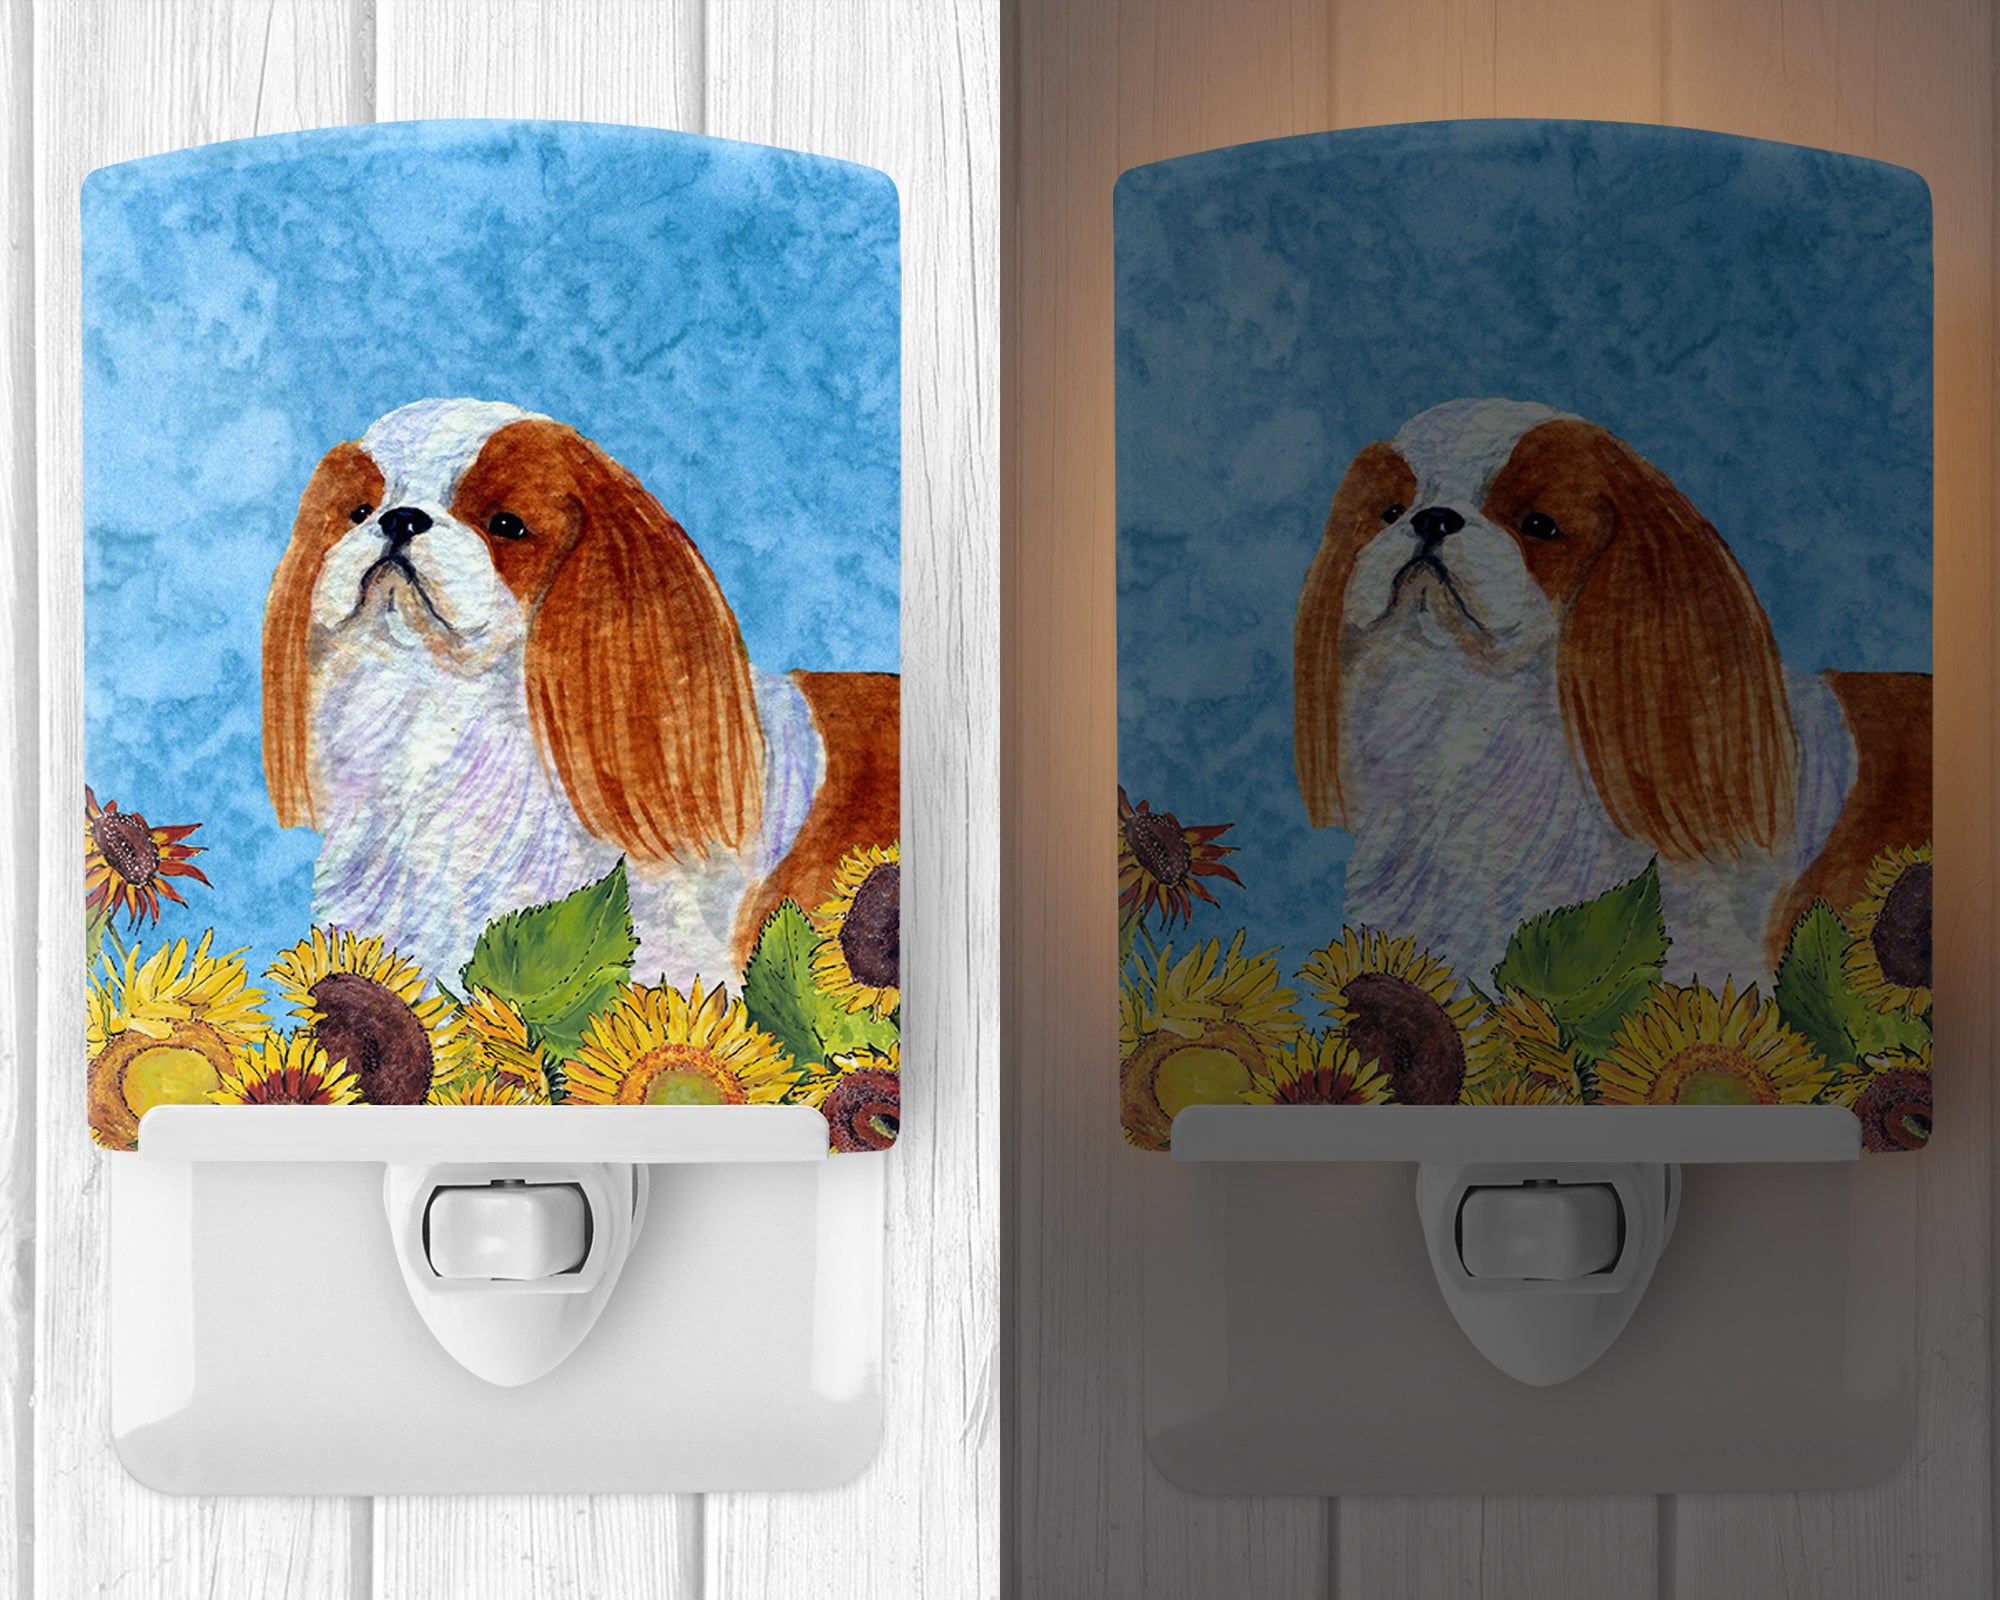 English Toy Spaniel in Summer Flowers Ceramic Night Light SS4140CNL - the-store.com